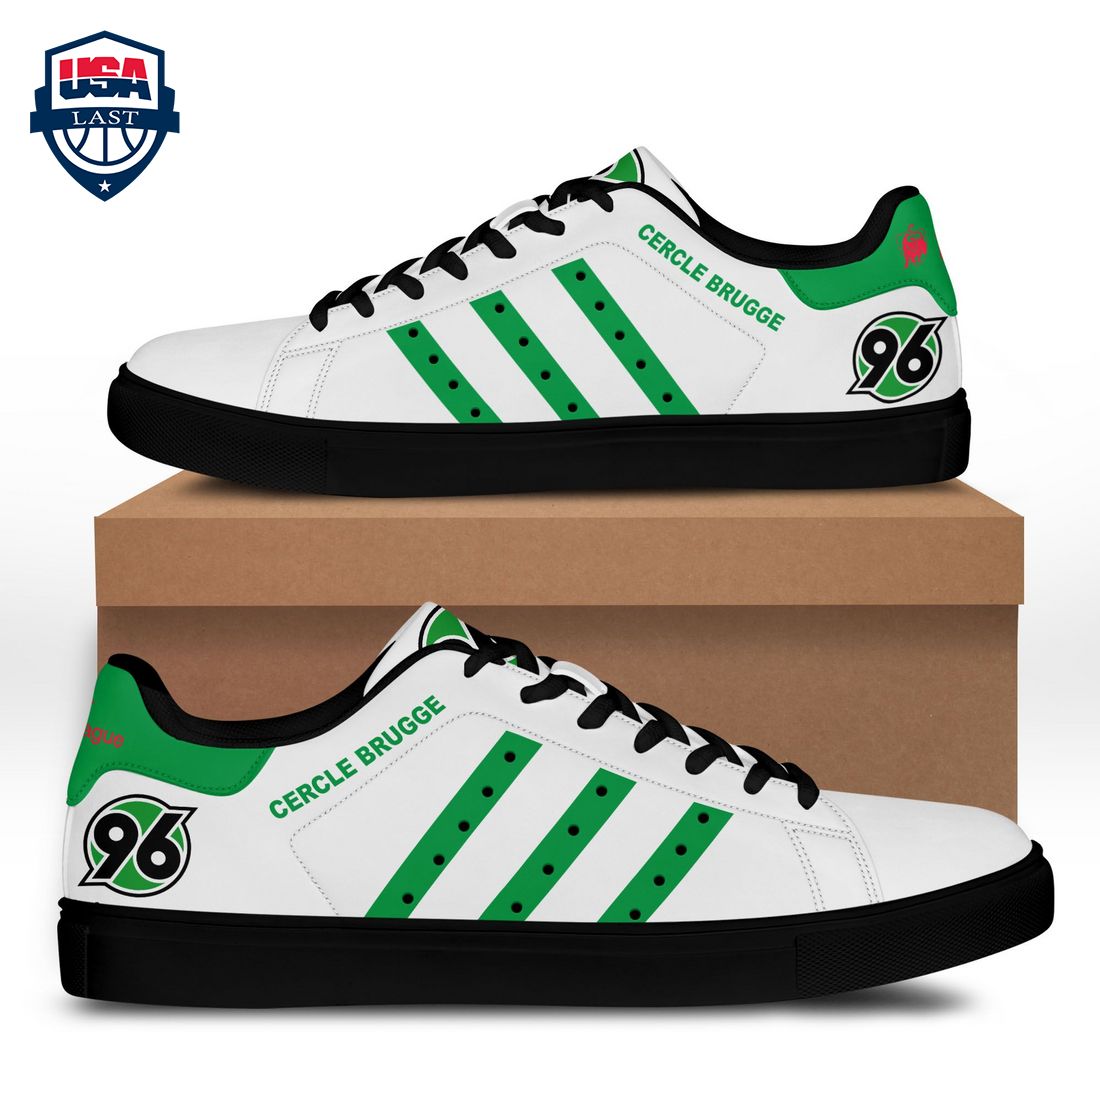 cercle-brugge-k-s-v-green-stripes-style-1-stan-smith-low-top-shoes-1-NTxcM.jpg